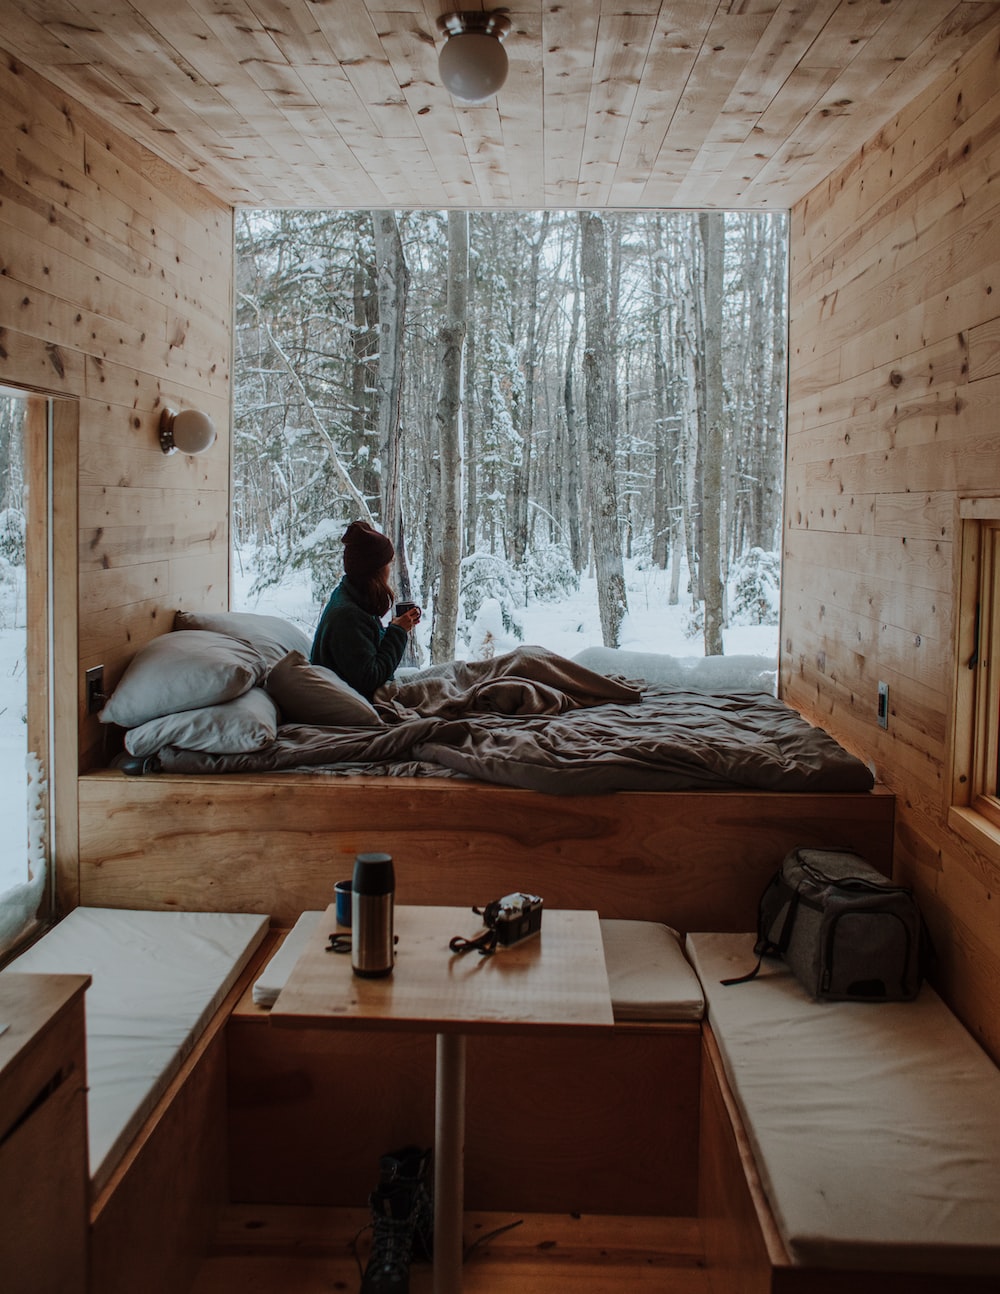 Winter Cabin Picture. Download Free Image